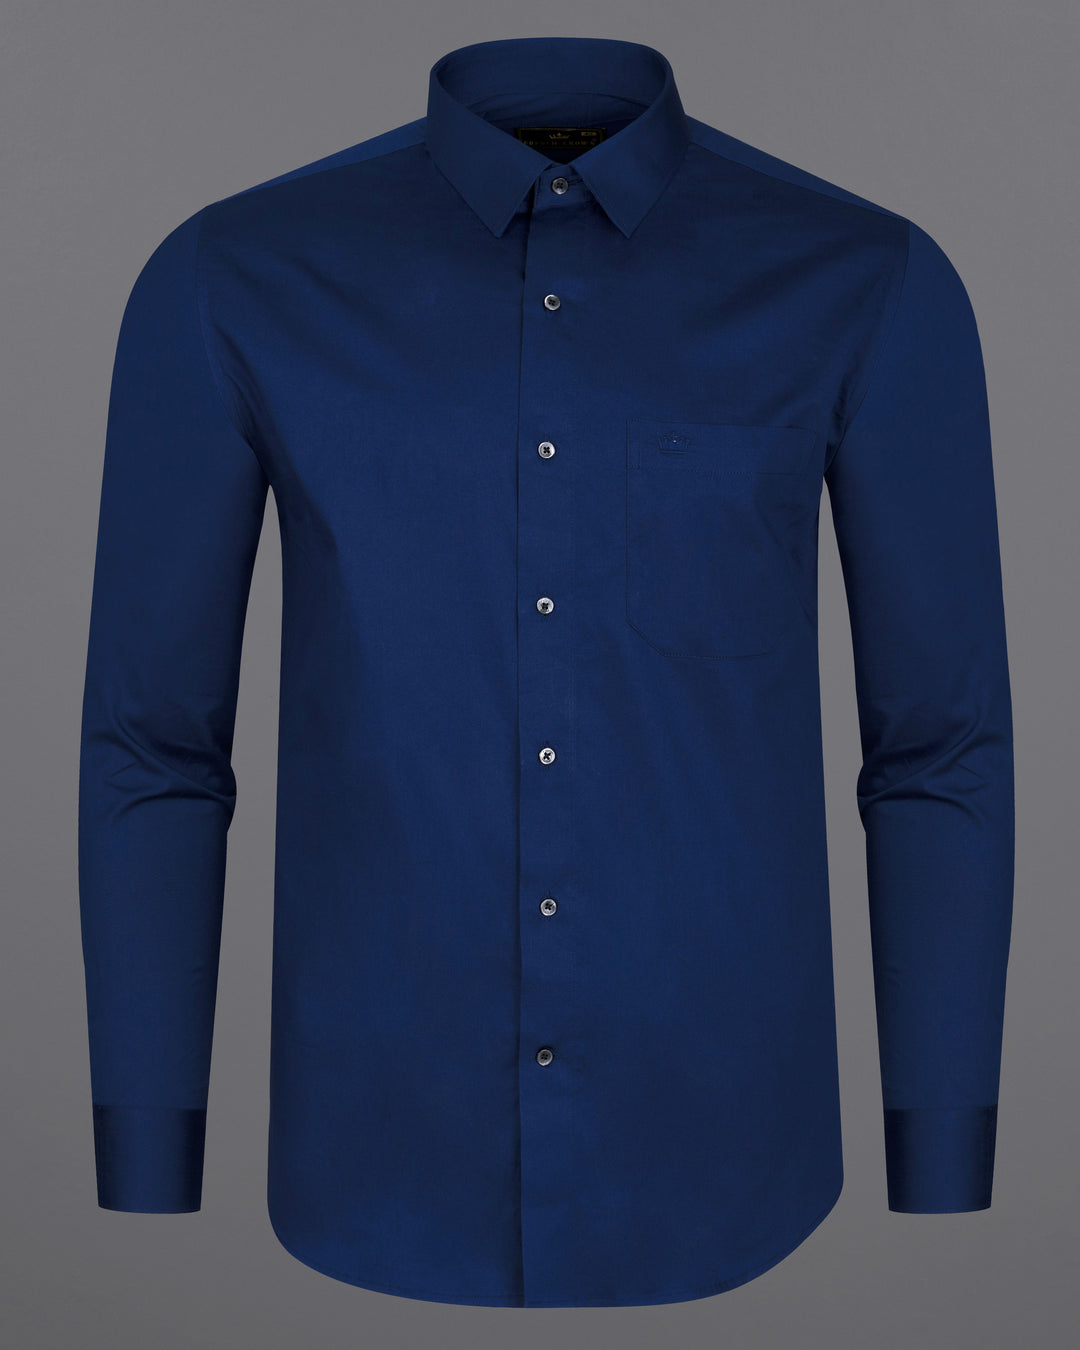 U.S. POLO ASSN. Men Solid Casual Blue Shirt - Buy U.S. POLO ASSN. Men Solid  Casual Blue Shirt Online at Best Prices in India | Flipkart.com